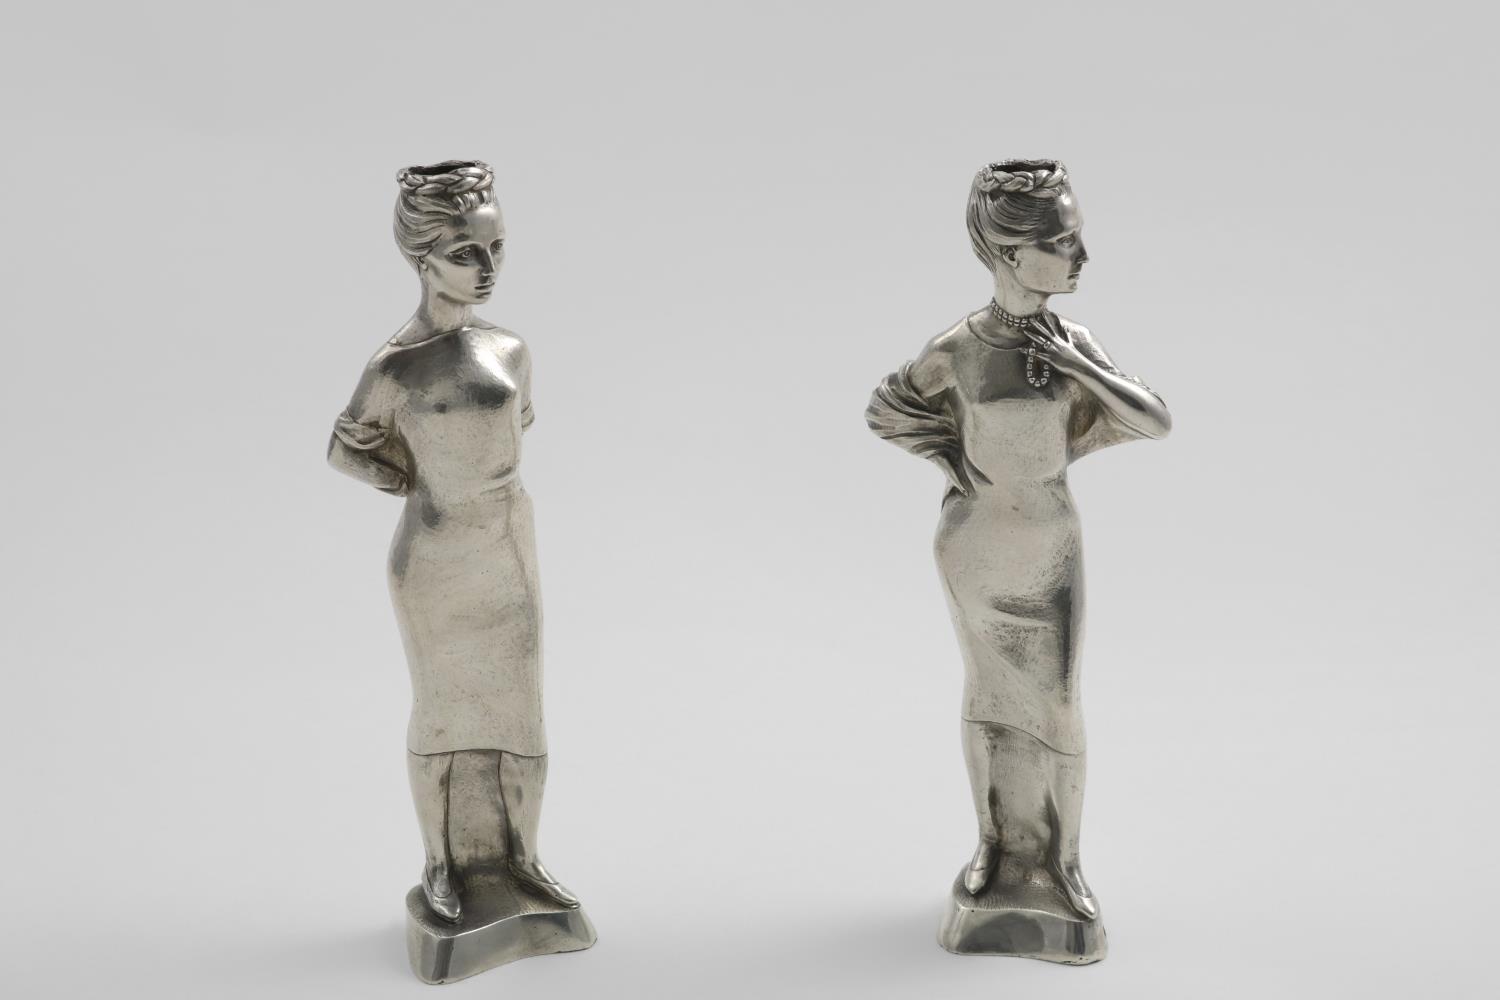 A PAIR OF LATE 20TH CENTURY SCULPTED FIGURAL CANDLESTICKS each in the form of a rather elegant